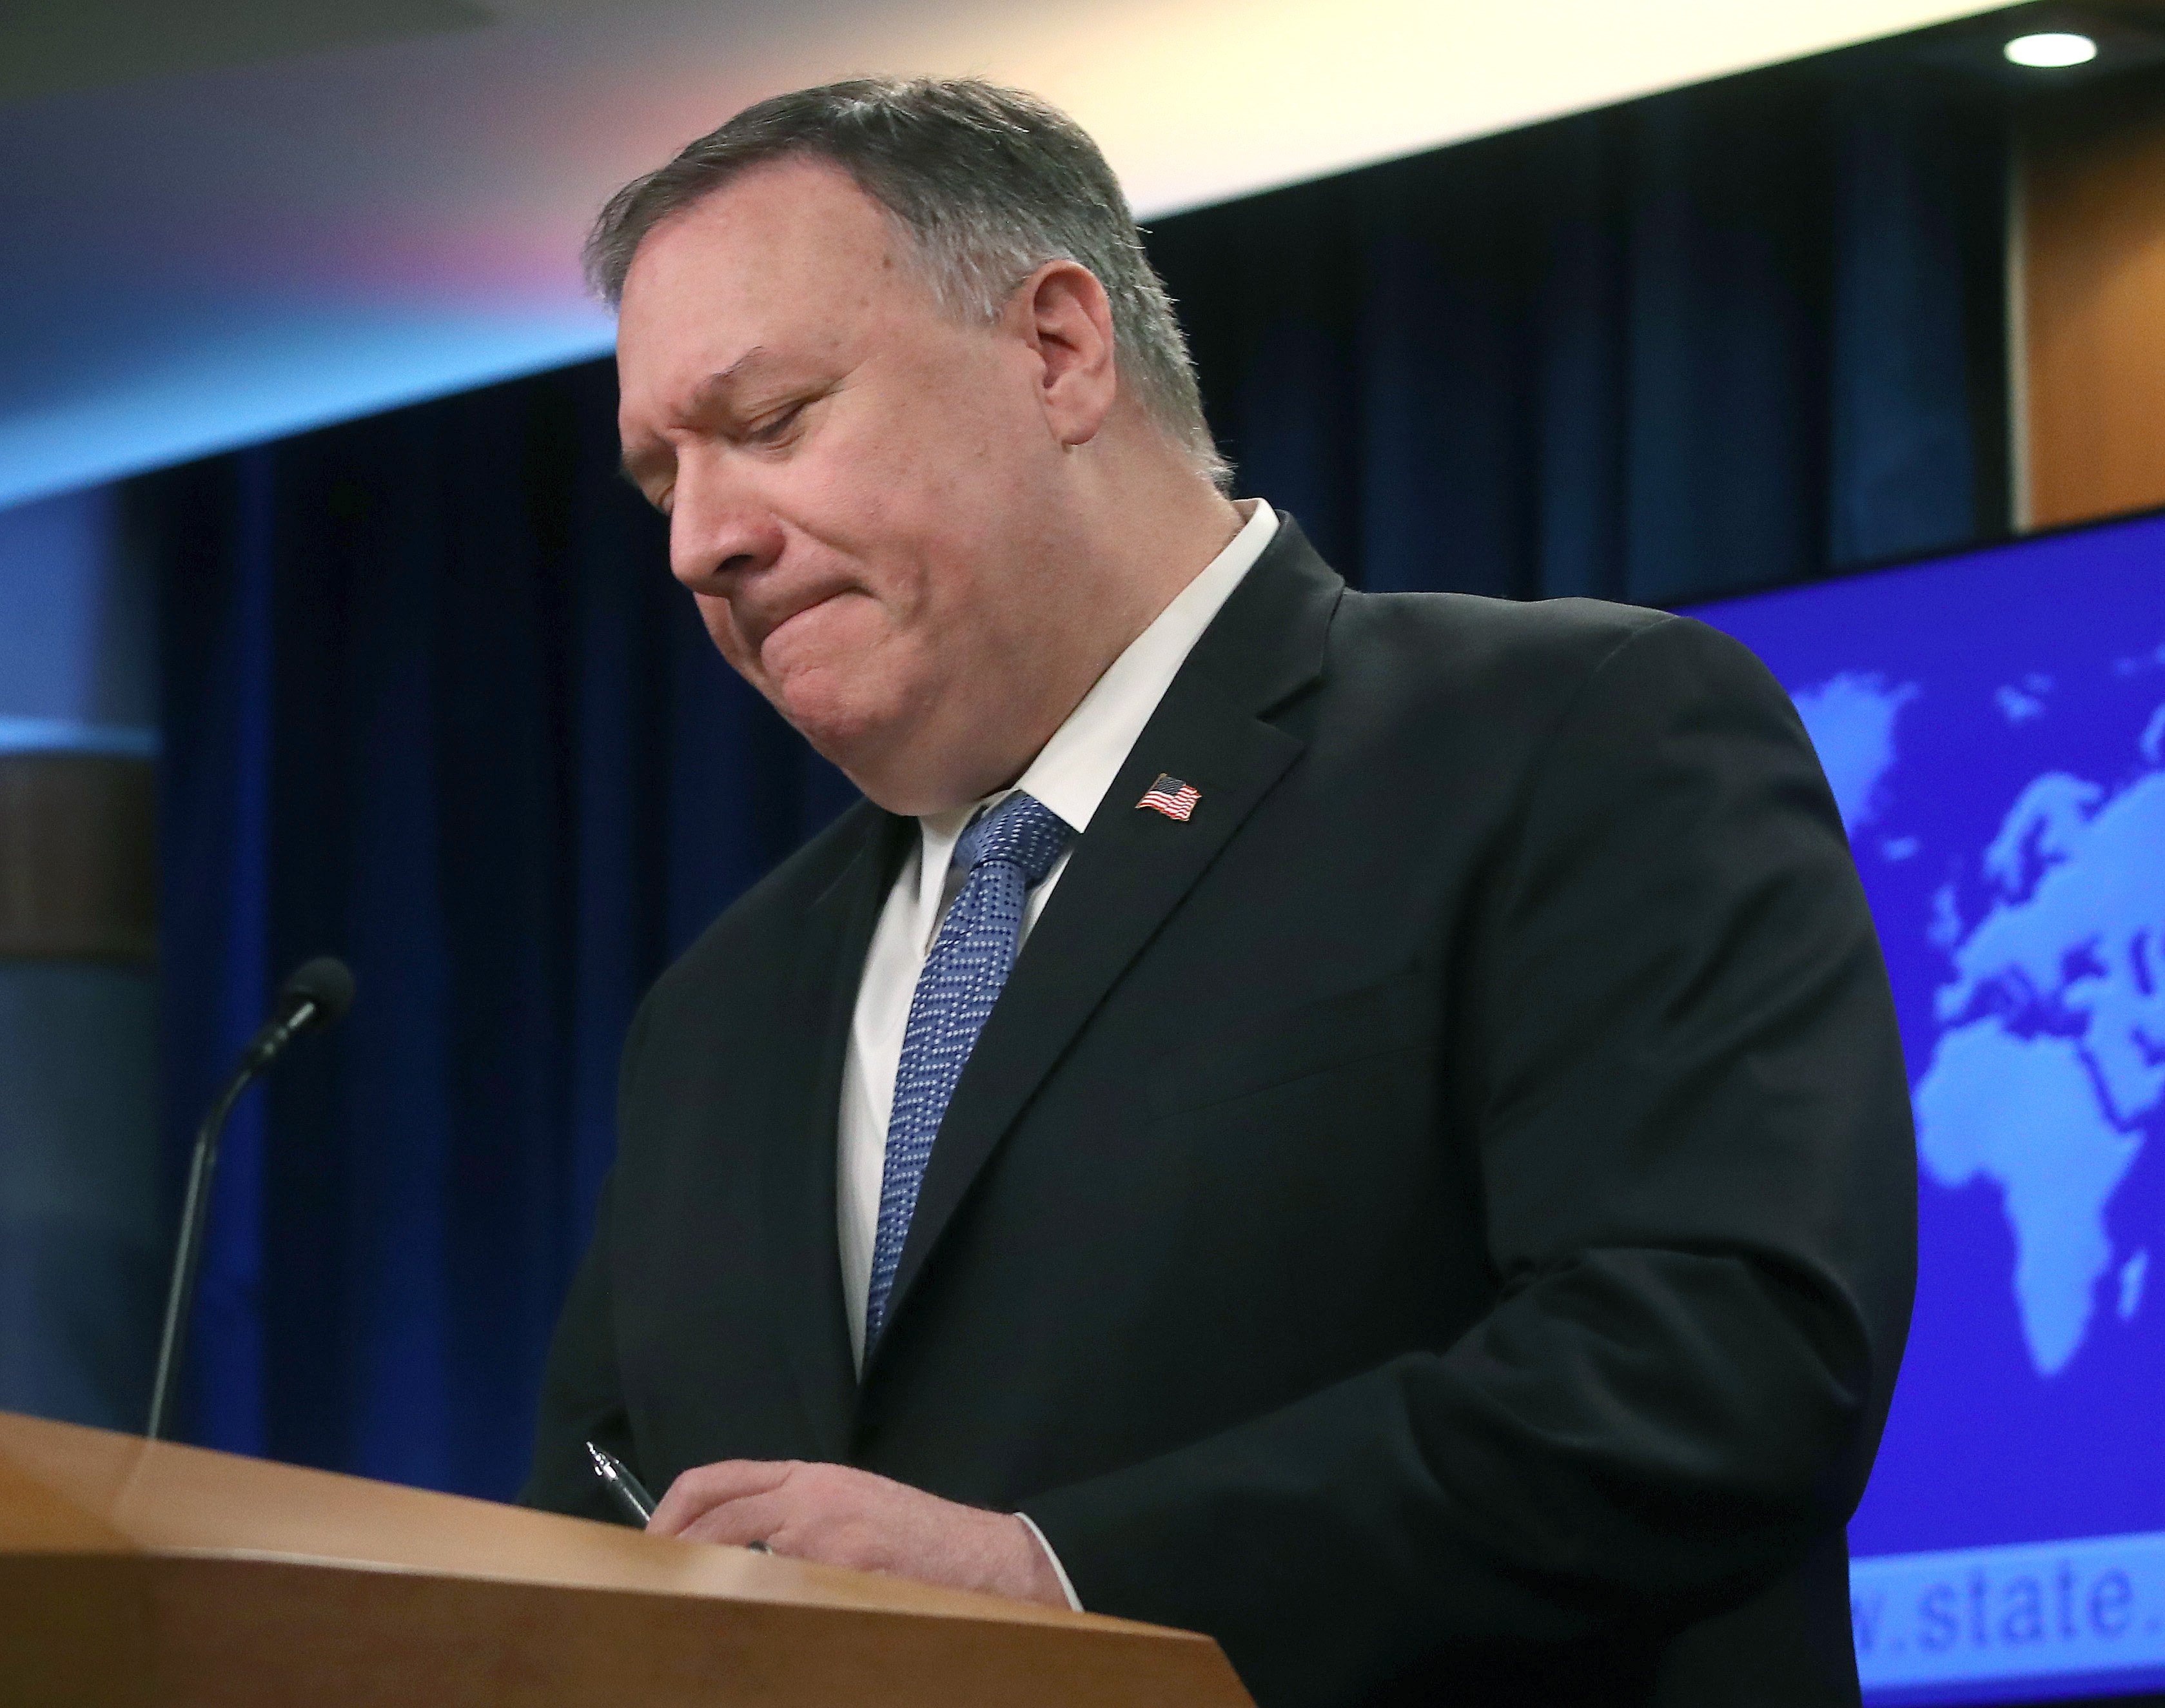 WASHINGTON, DC - MARCH 05: U.S. Secretary of State Mike Pompeo speaks during a briefing at the State Department on February 5, 2020 in Washington, DC. Secretary Pompeo spoke on several topics including the coronavirus and the recent truce with the Taliban. (Photo by Mark Wilson/Getty Images)